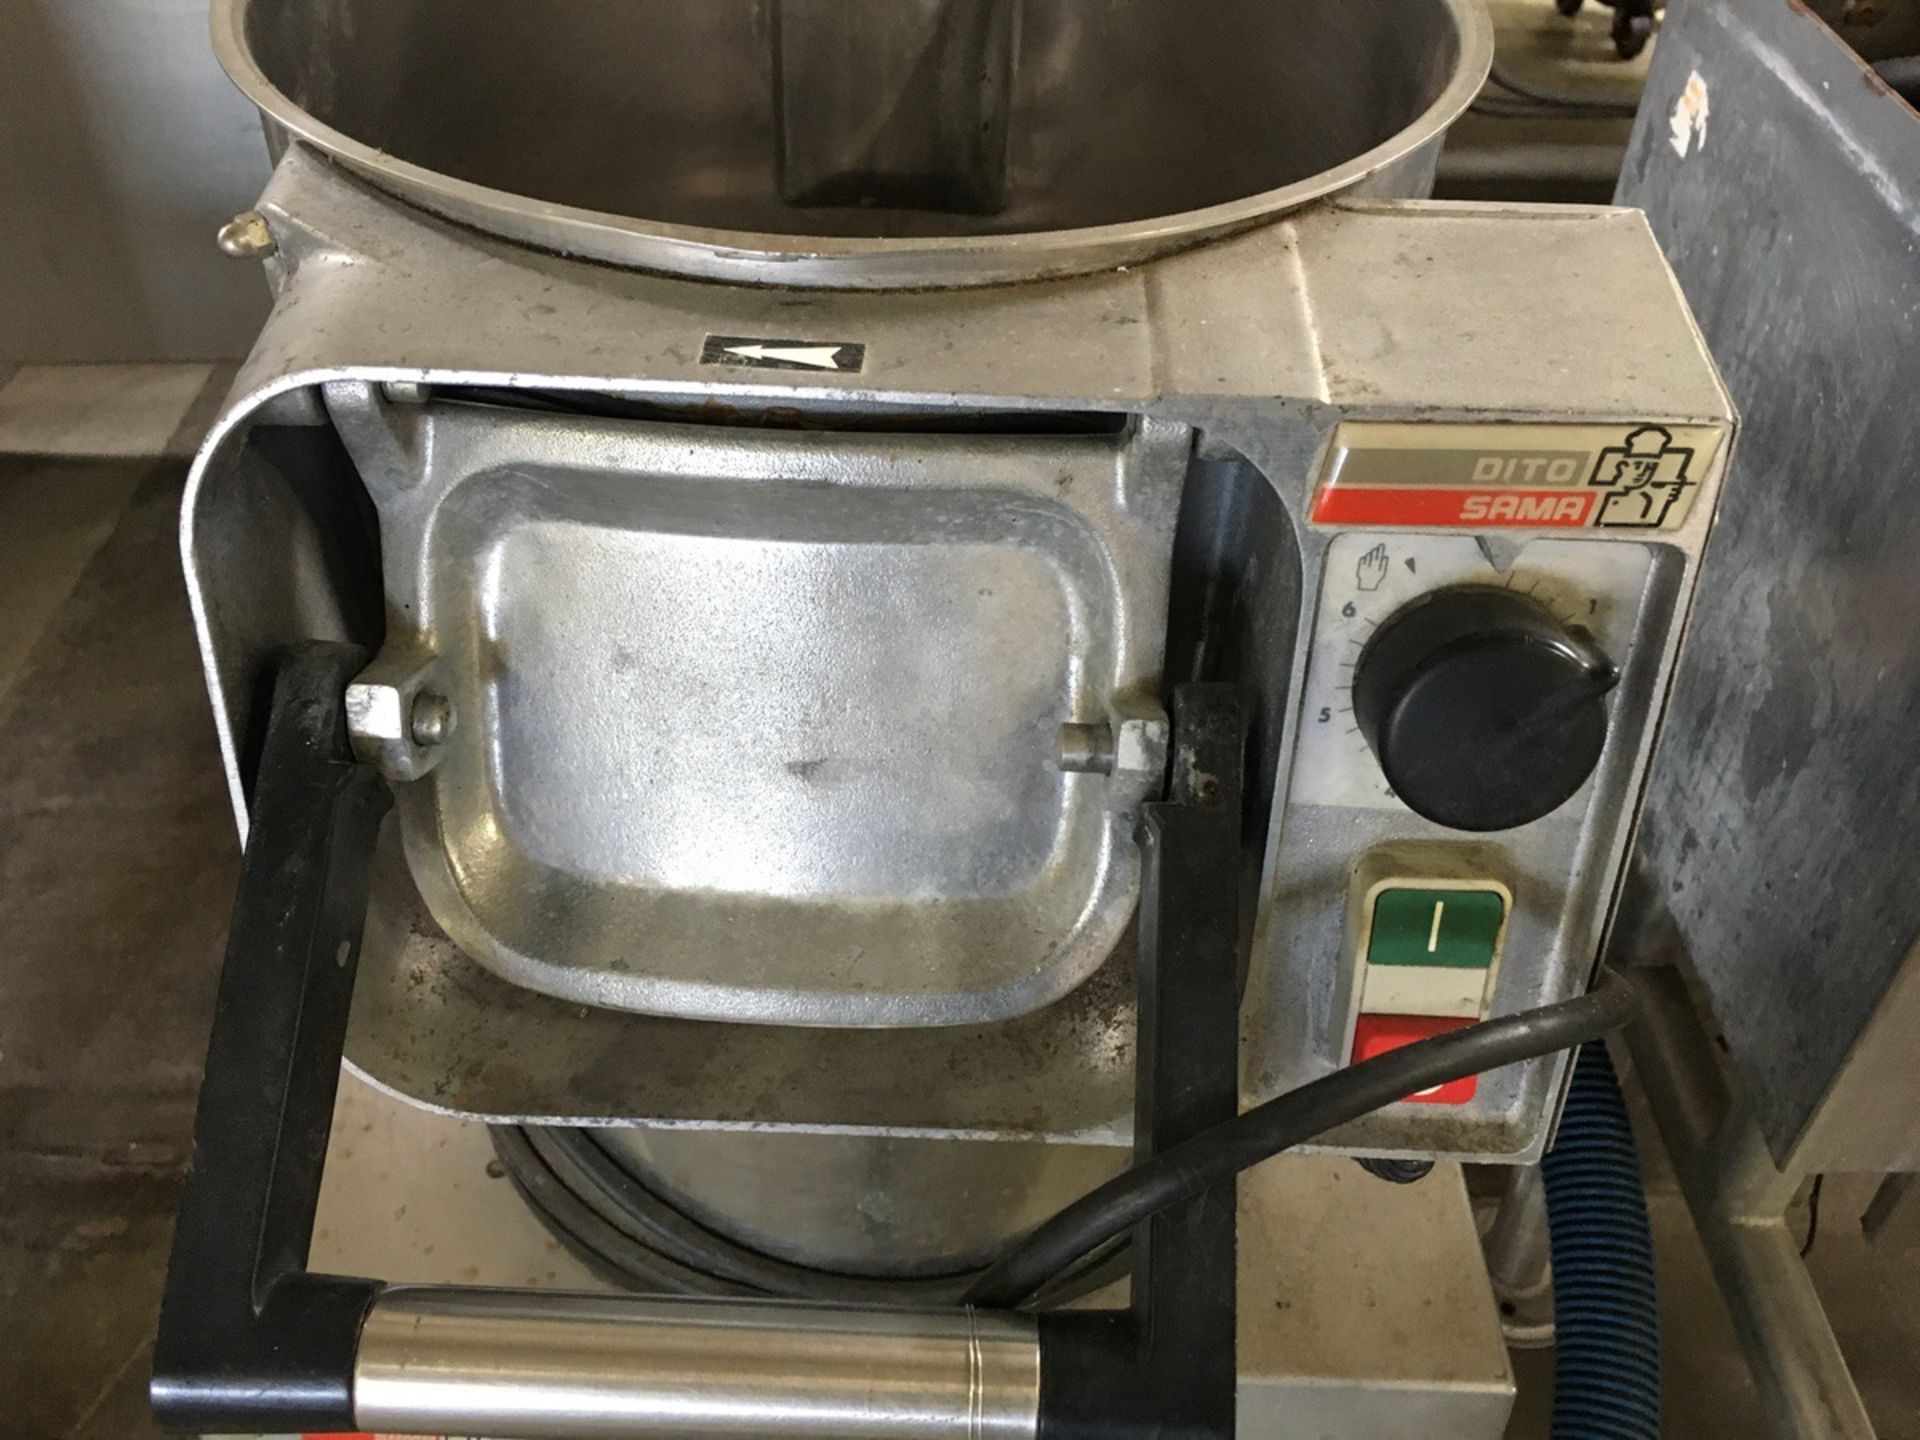 Dito Sama Model T5S Vegetable Peeler, S/N: 19464 0020 001 | Rig Fee: No Charge - Image 3 of 5